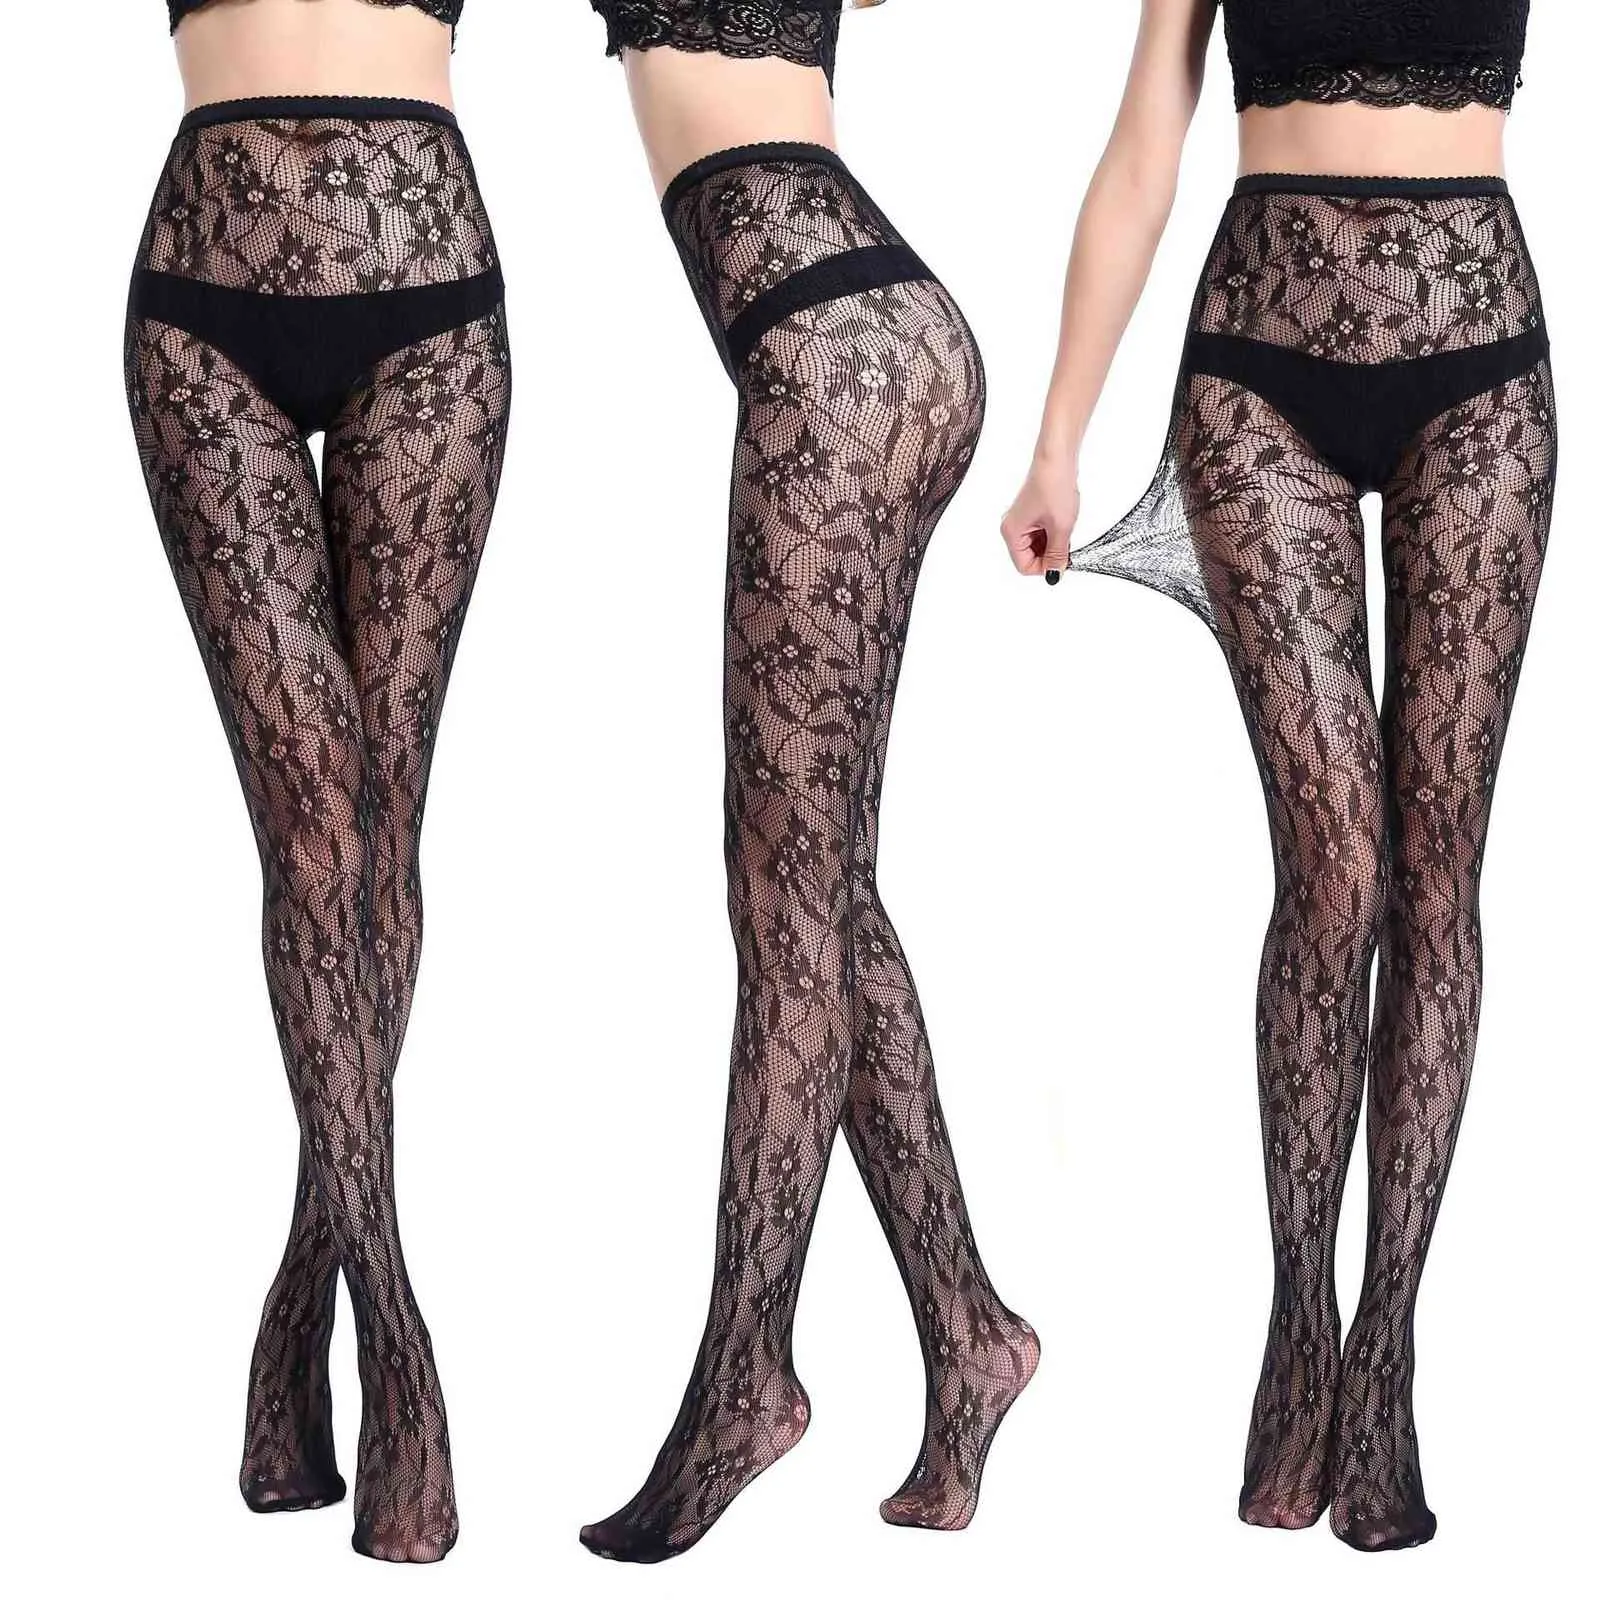 HOT Black Lace Stockings Leg Warmers Tights Lace Sexy Hosiery Women Thigh High Fishnet Embroidery Transparent Pantyhose X0521